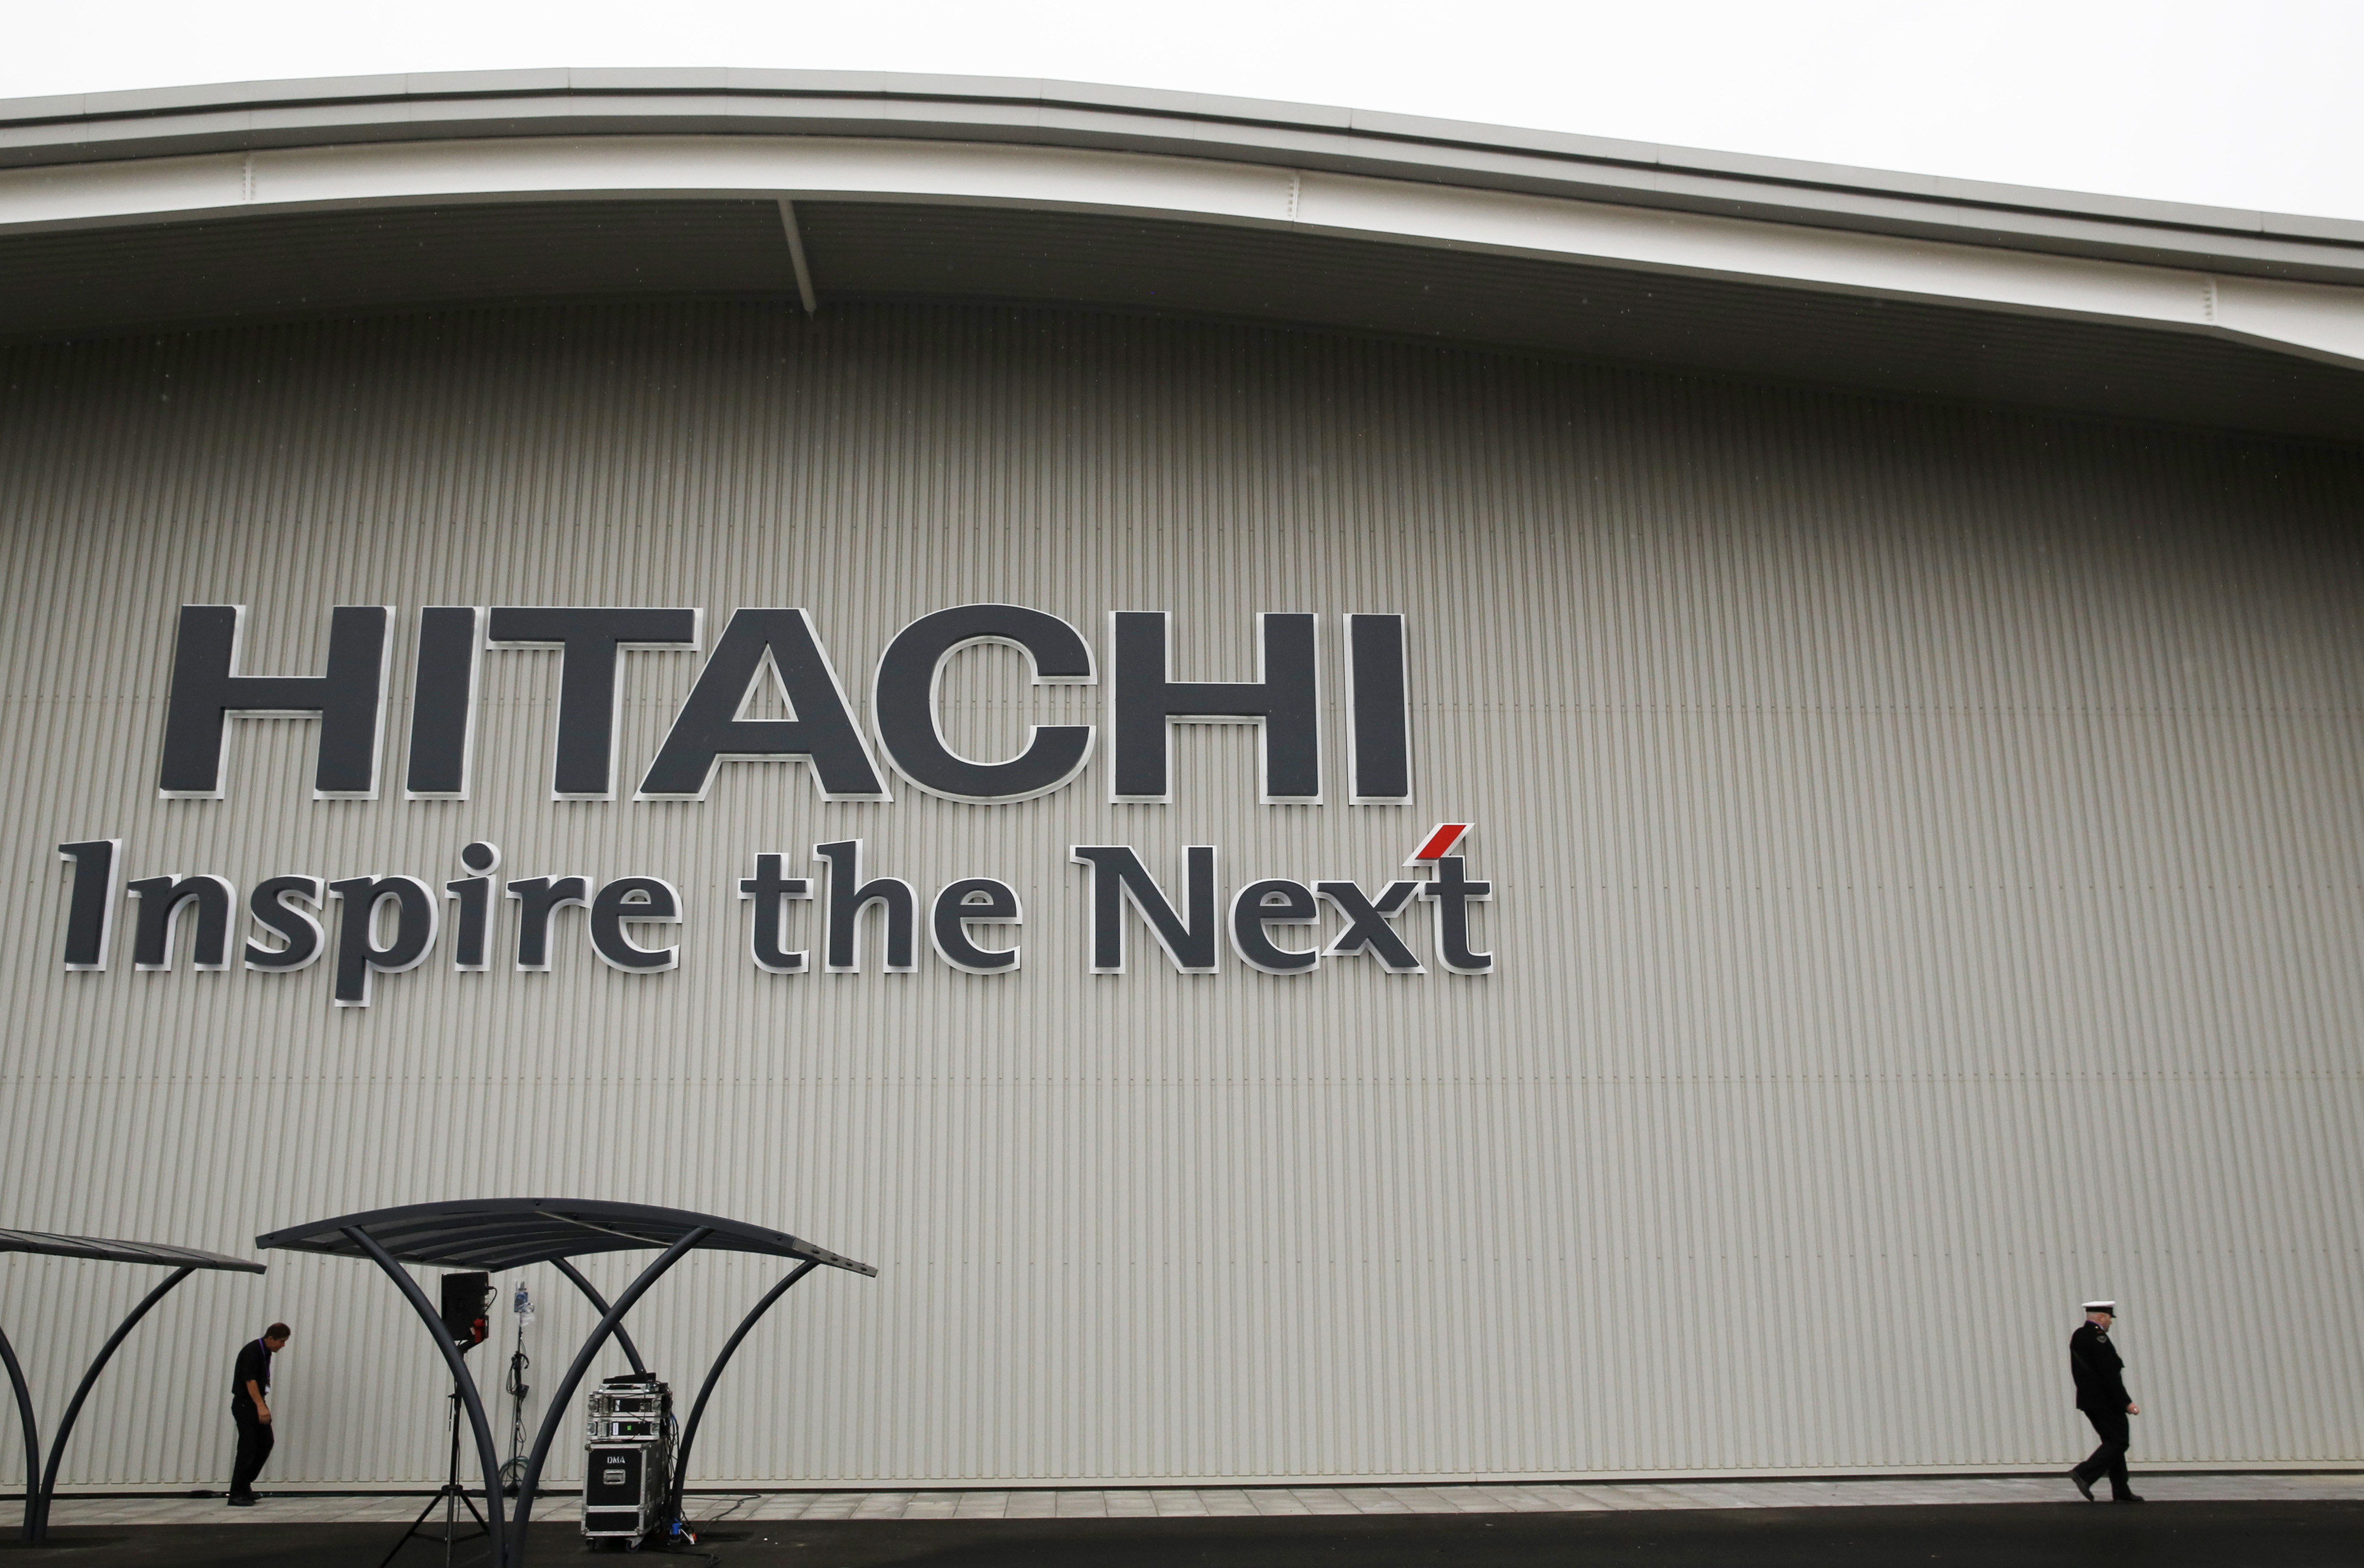 Hitachi Ltd., whose products include bullet trains, elevators and power plant equipment, is investing more in research and development, with a focus on regenerative medicine. It claims to receive one patent an hour on average. | BLOOMBERG